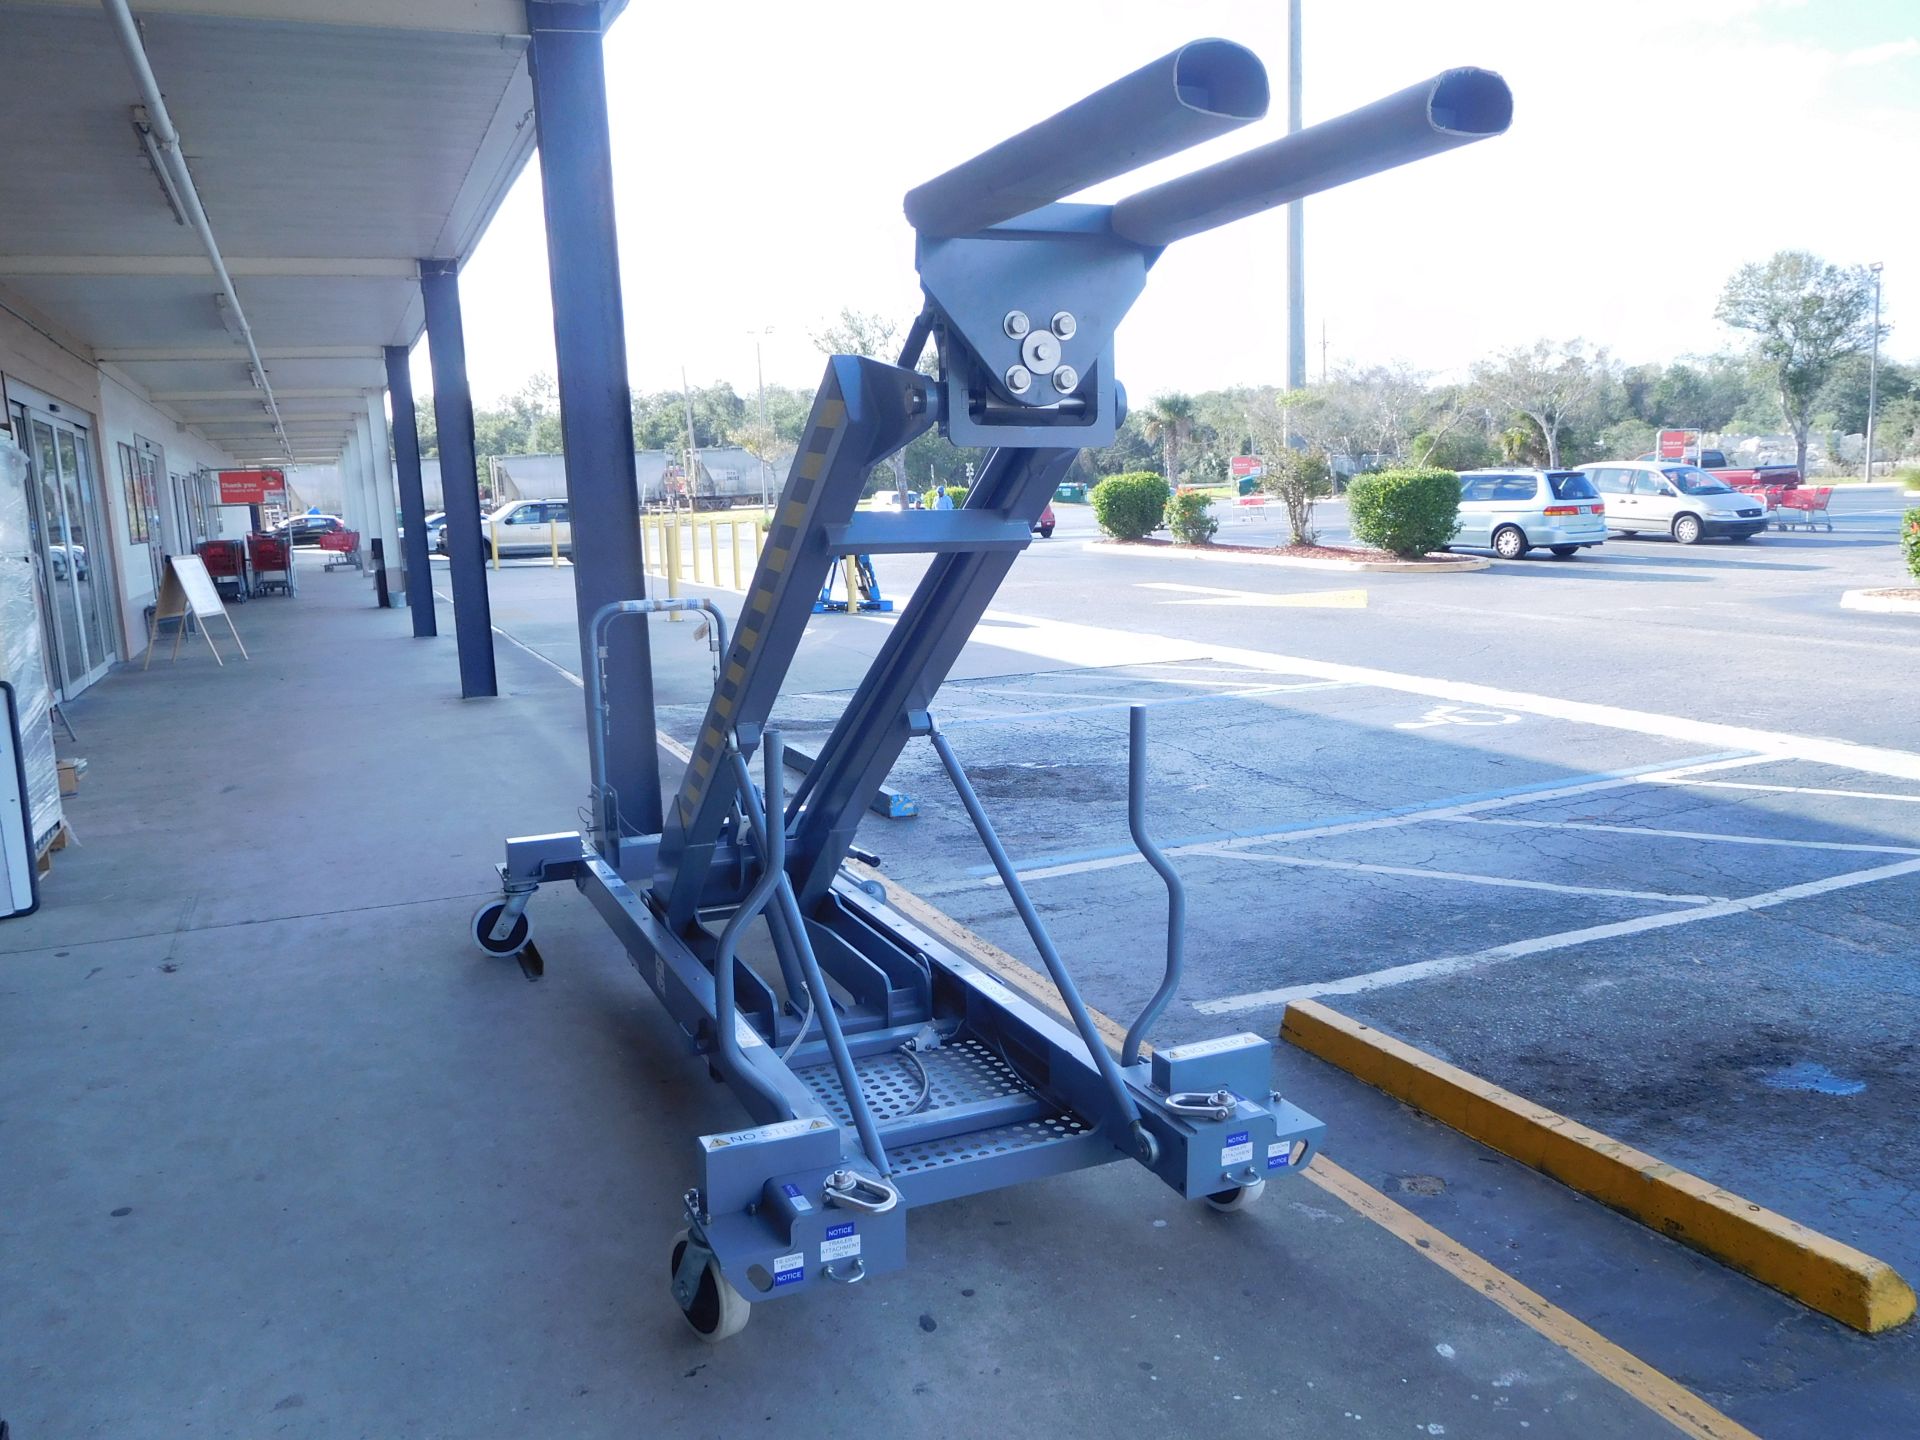 "NEW" DIDSBURY 2SJJ02731-0004 MILITARY MUNITIONS LIFT/LOADER. VERY HIGH QUALITY PRECISION - Image 4 of 8